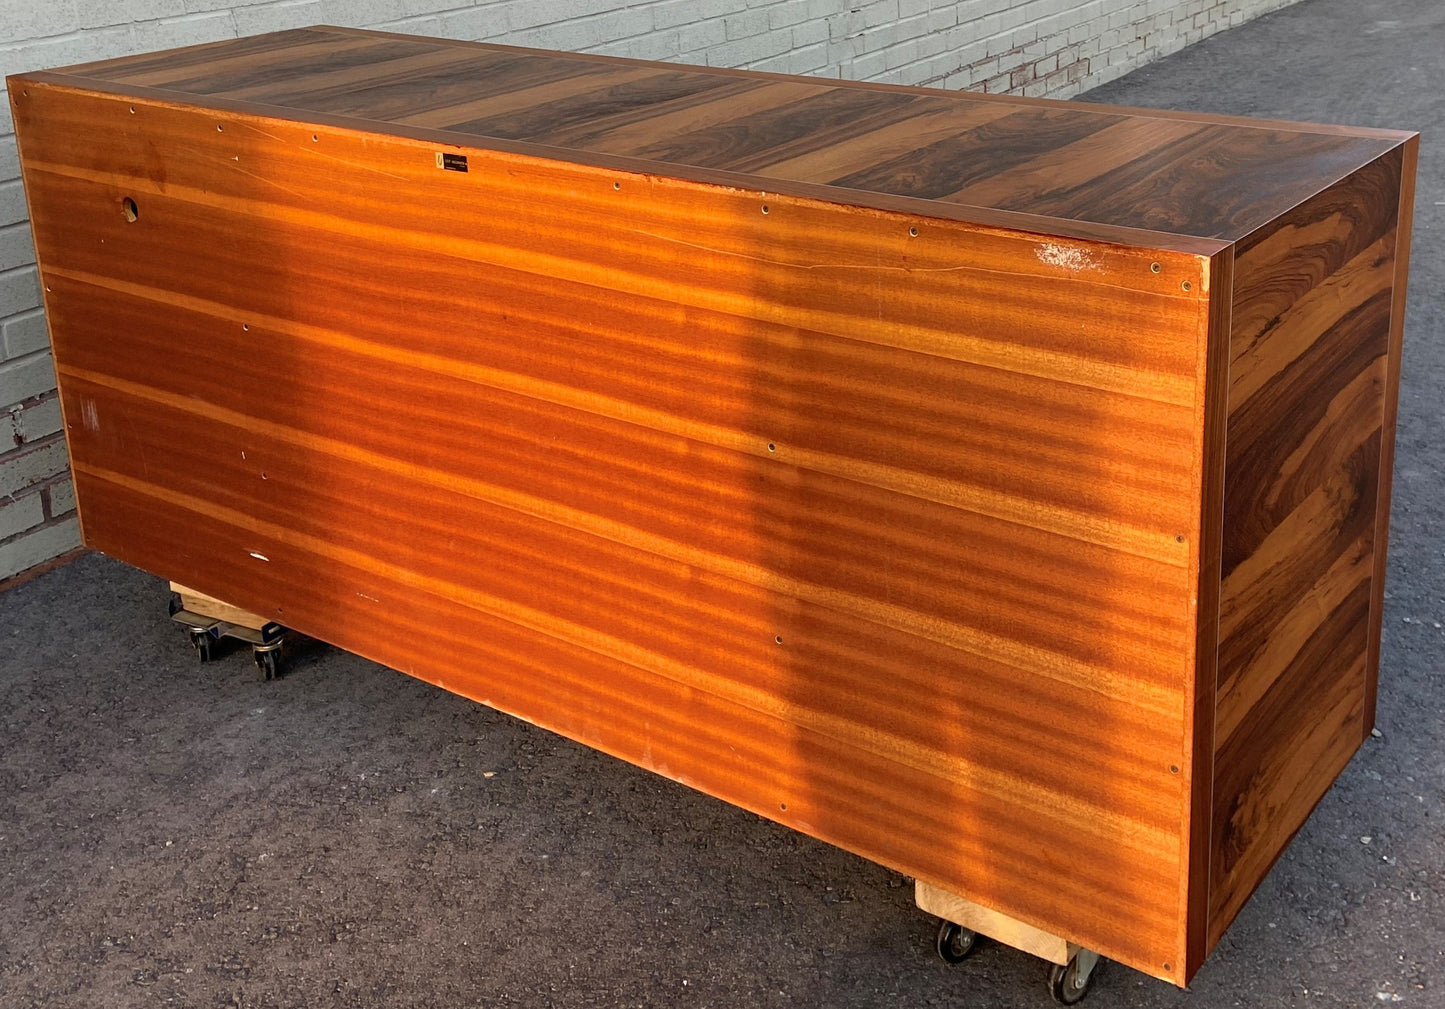 REFINISHED MCM rosewood credenza by Leif Jacobsen